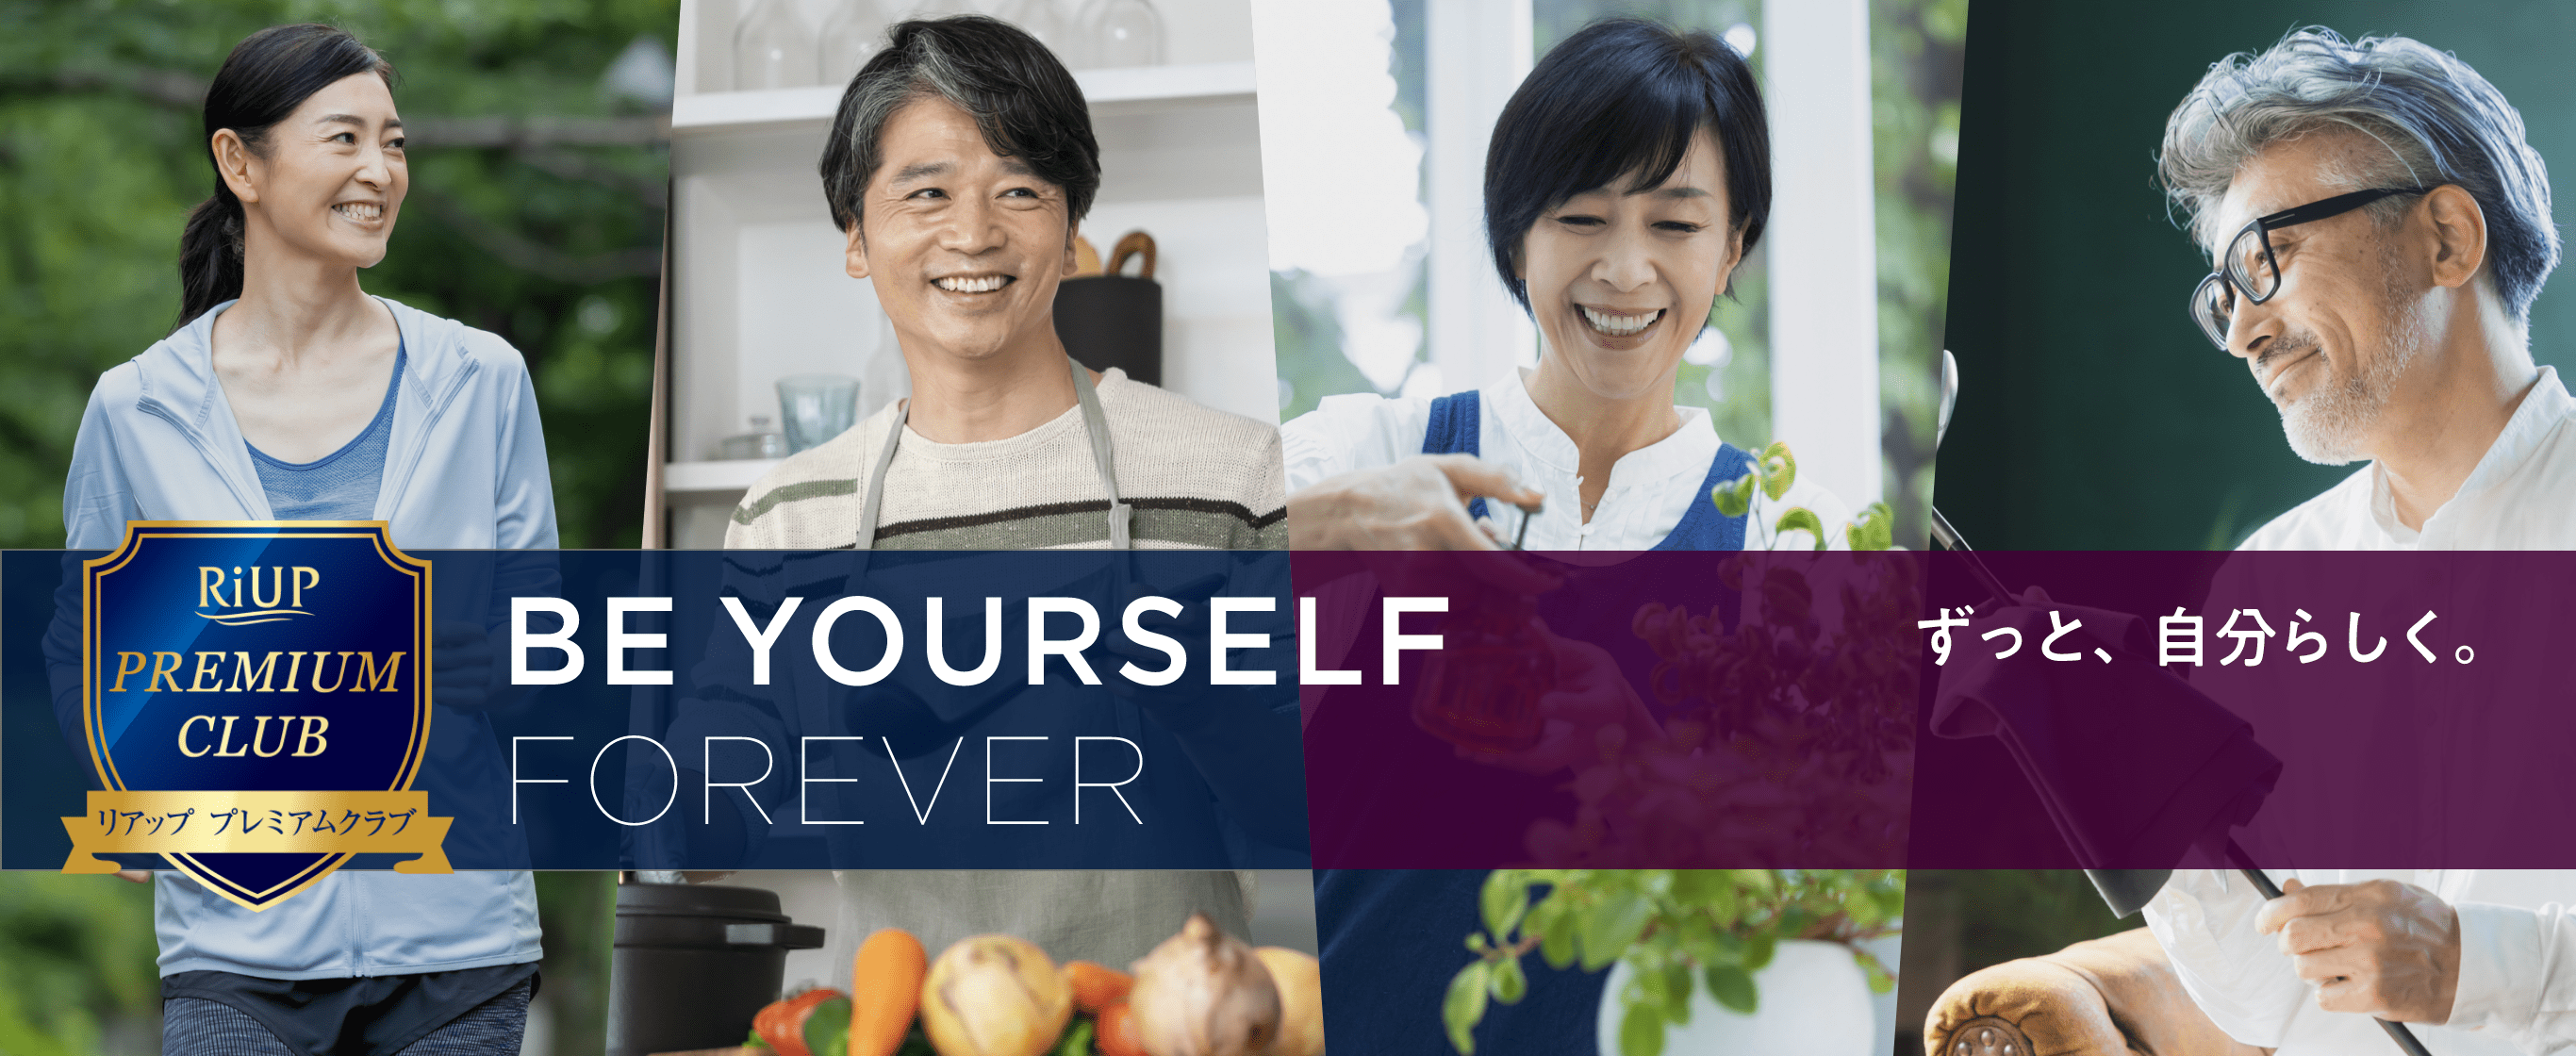 Be yourself forever ずっと、自分らしく。